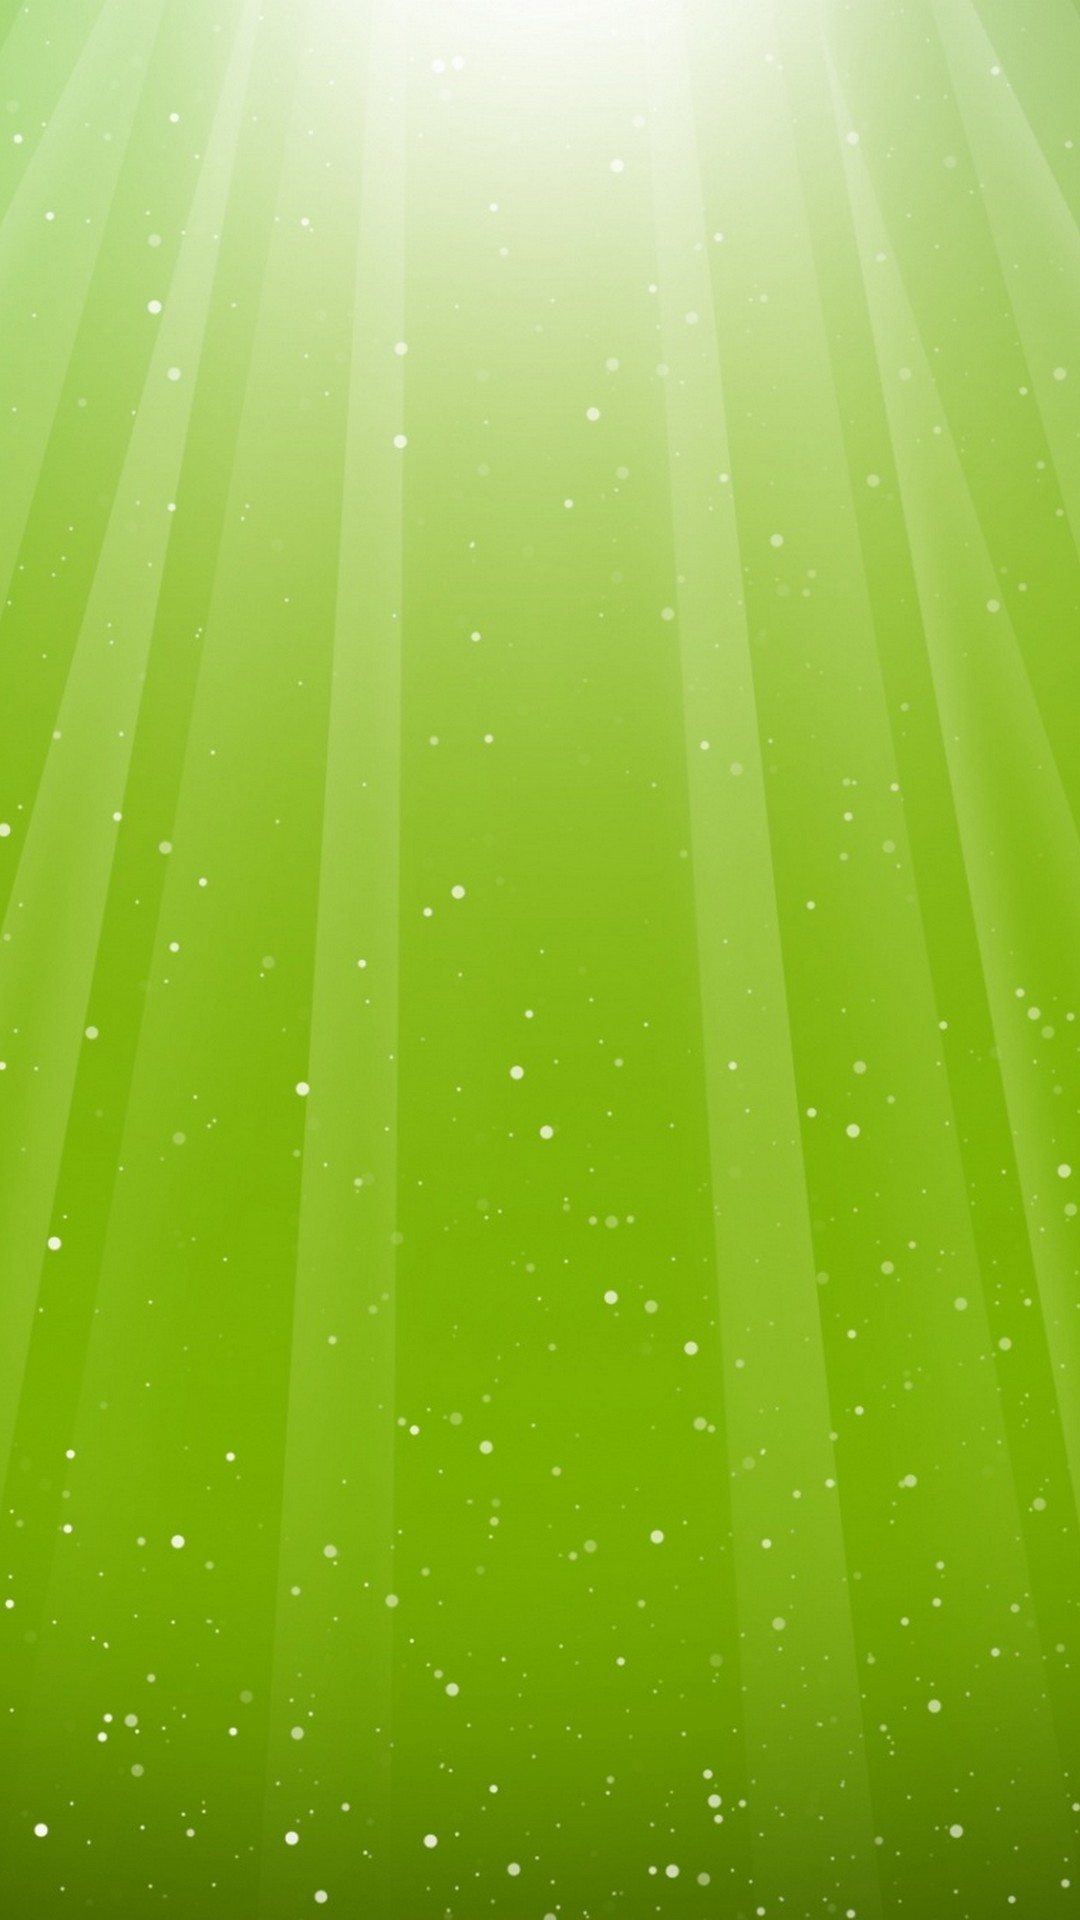 Light Green iPhone Wallpaper with image resolution 1080x1920 pixel. You can make this wallpaper for your iPhone 5, 6, 7, 8, X backgrounds, Mobile Screensaver, or iPad Lock Screen